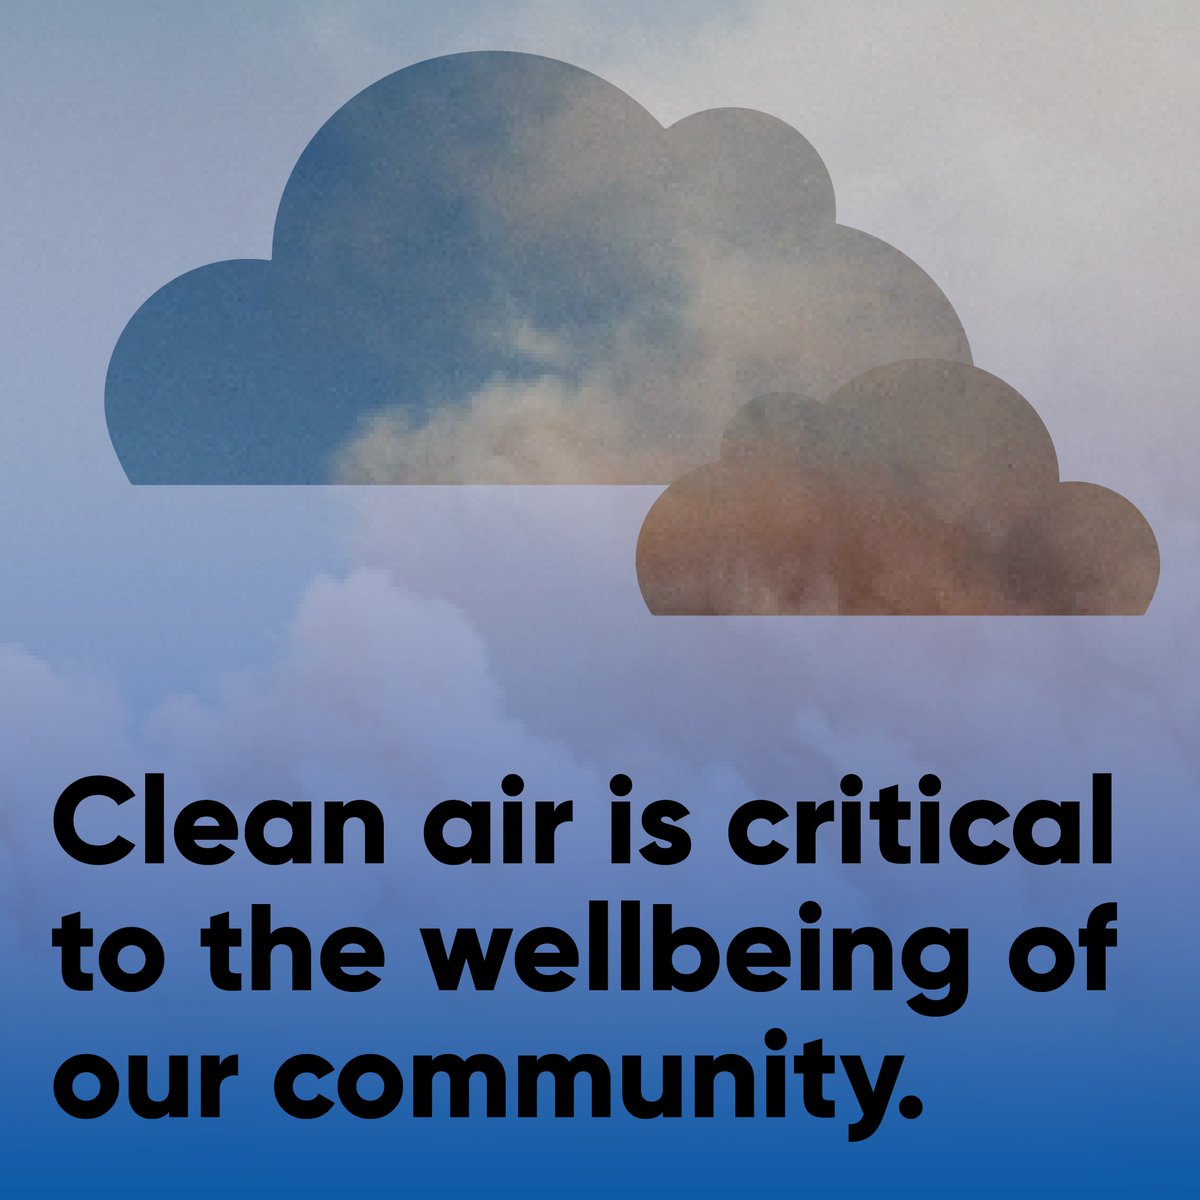 Clean air is essential for sustaining life on Earth and is critical to the wellbeing of our community. It's crucial that the ACT Government takes steps to safeguard public health against poor air quality in the Territory. Find out more: actsoe2023.com.au/themes/air/